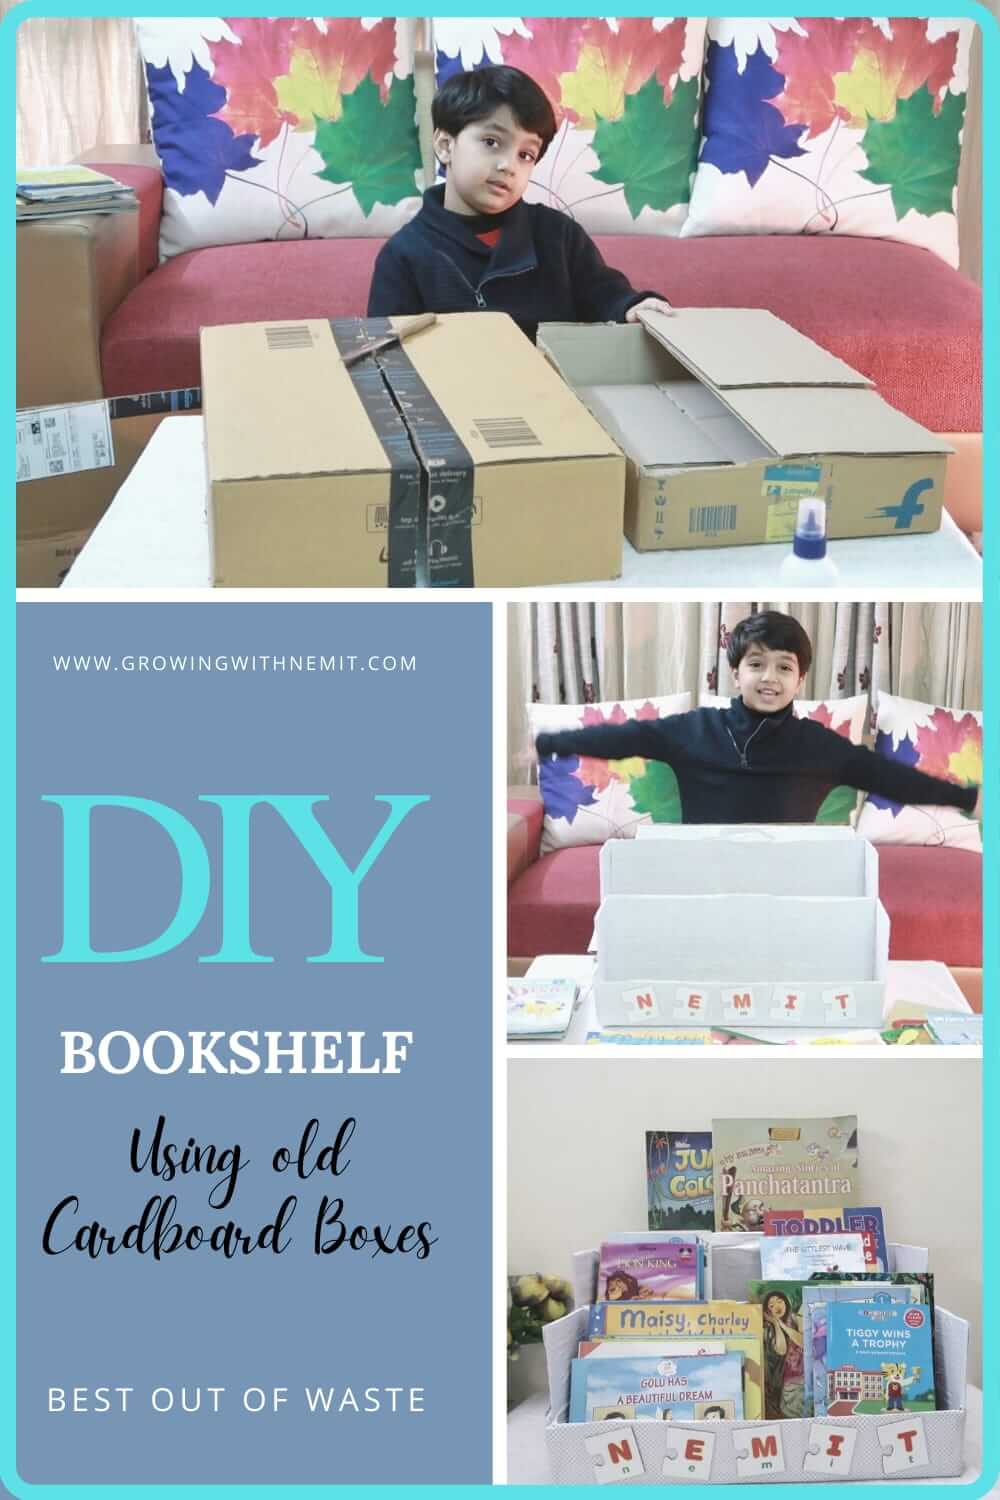 DIY Bookshelf and Reading Nook for Kids. We will use old cardboard boxes to make a bookshelf and we will repurpose an old baby cot into a reading nook.